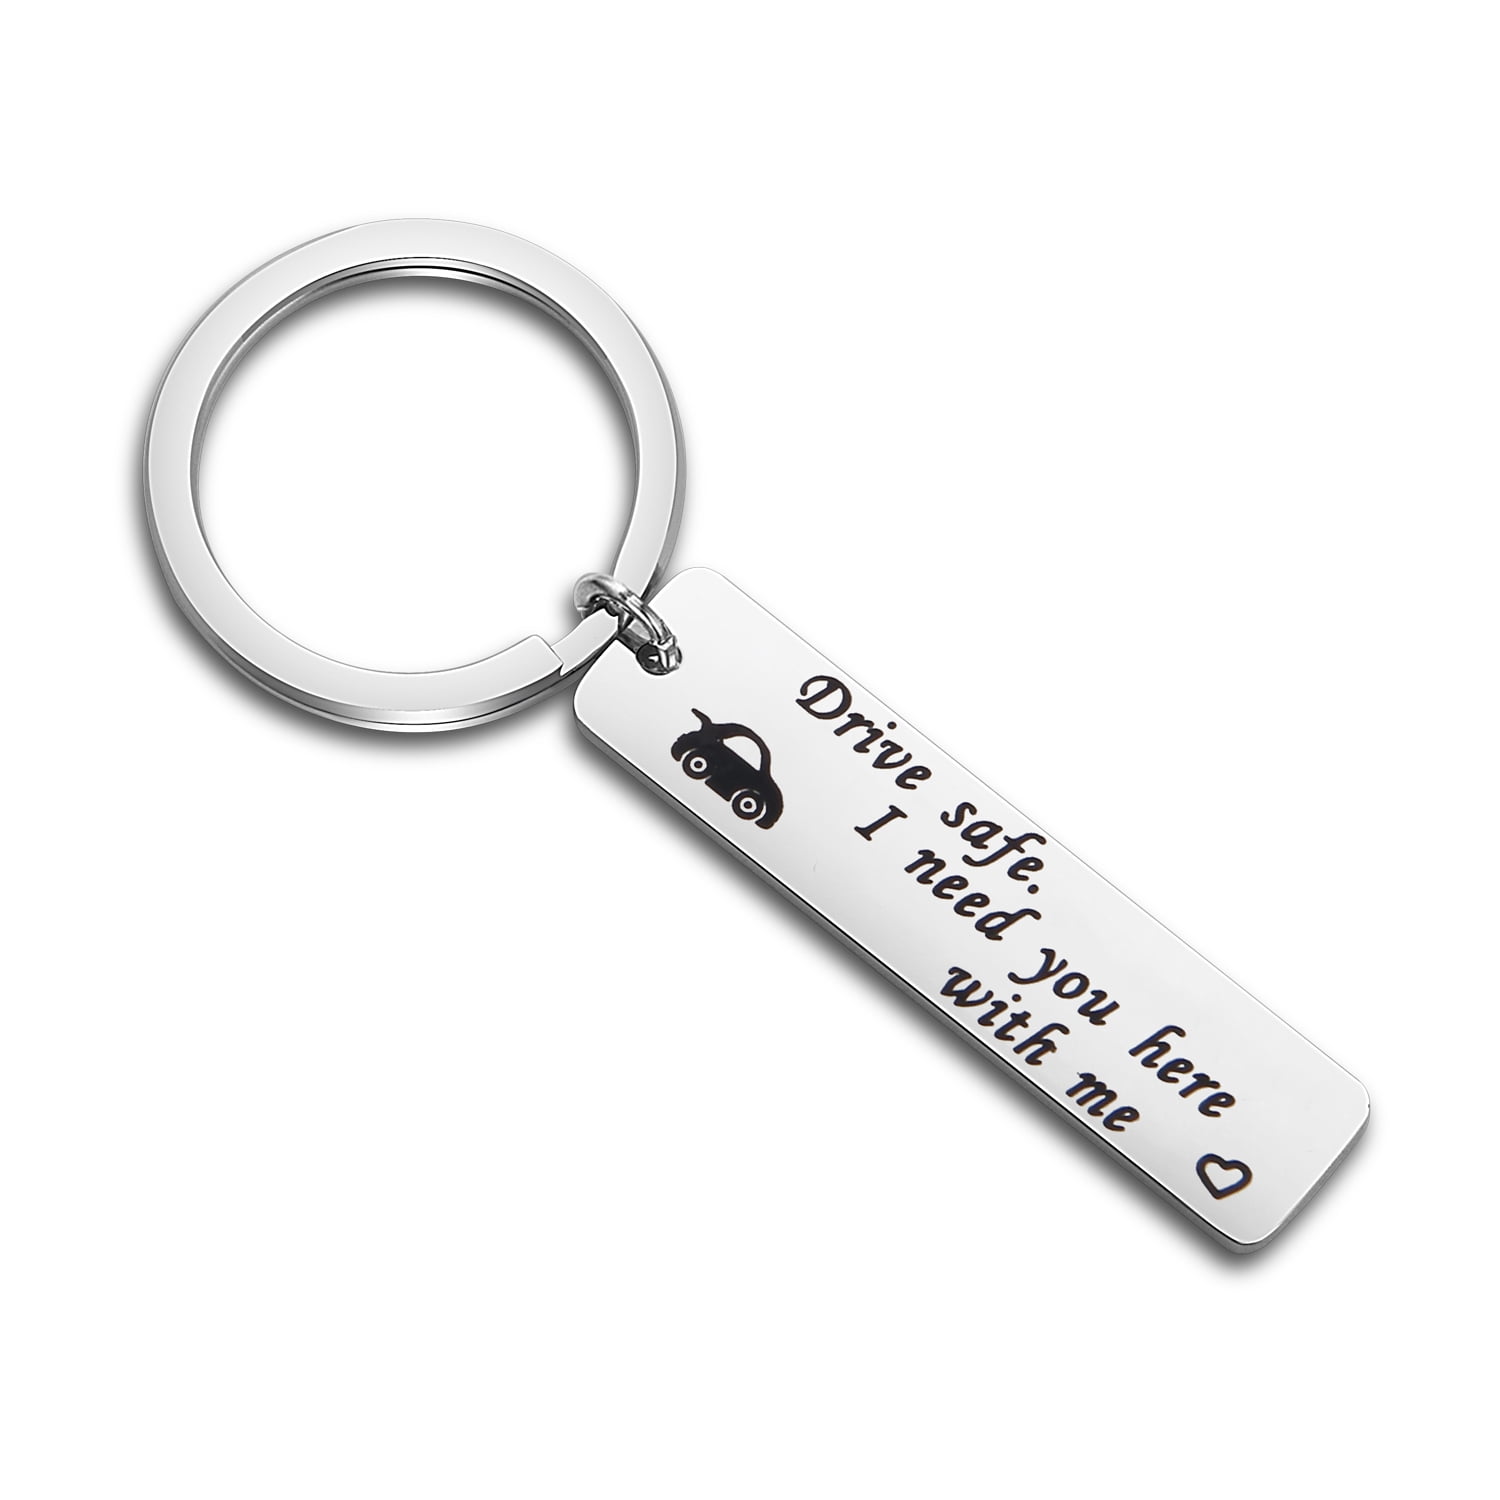 Engraved Keychain Keyring Gift Box Drive Safe I Need You Here With Me Car Ring 